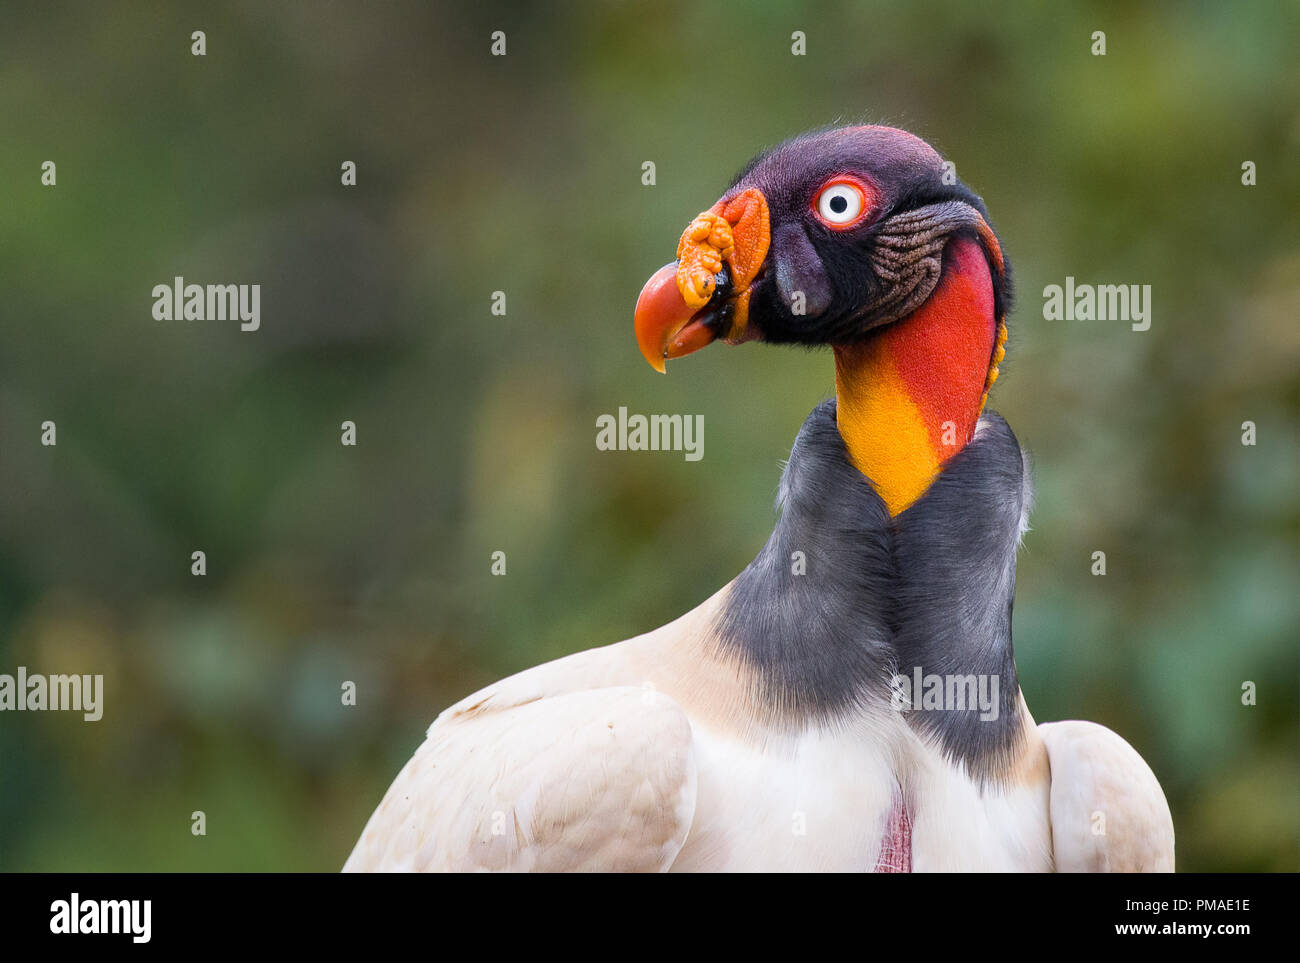 Portrait of a king vulture. Photograph taken in Costa Rica Stock Photo